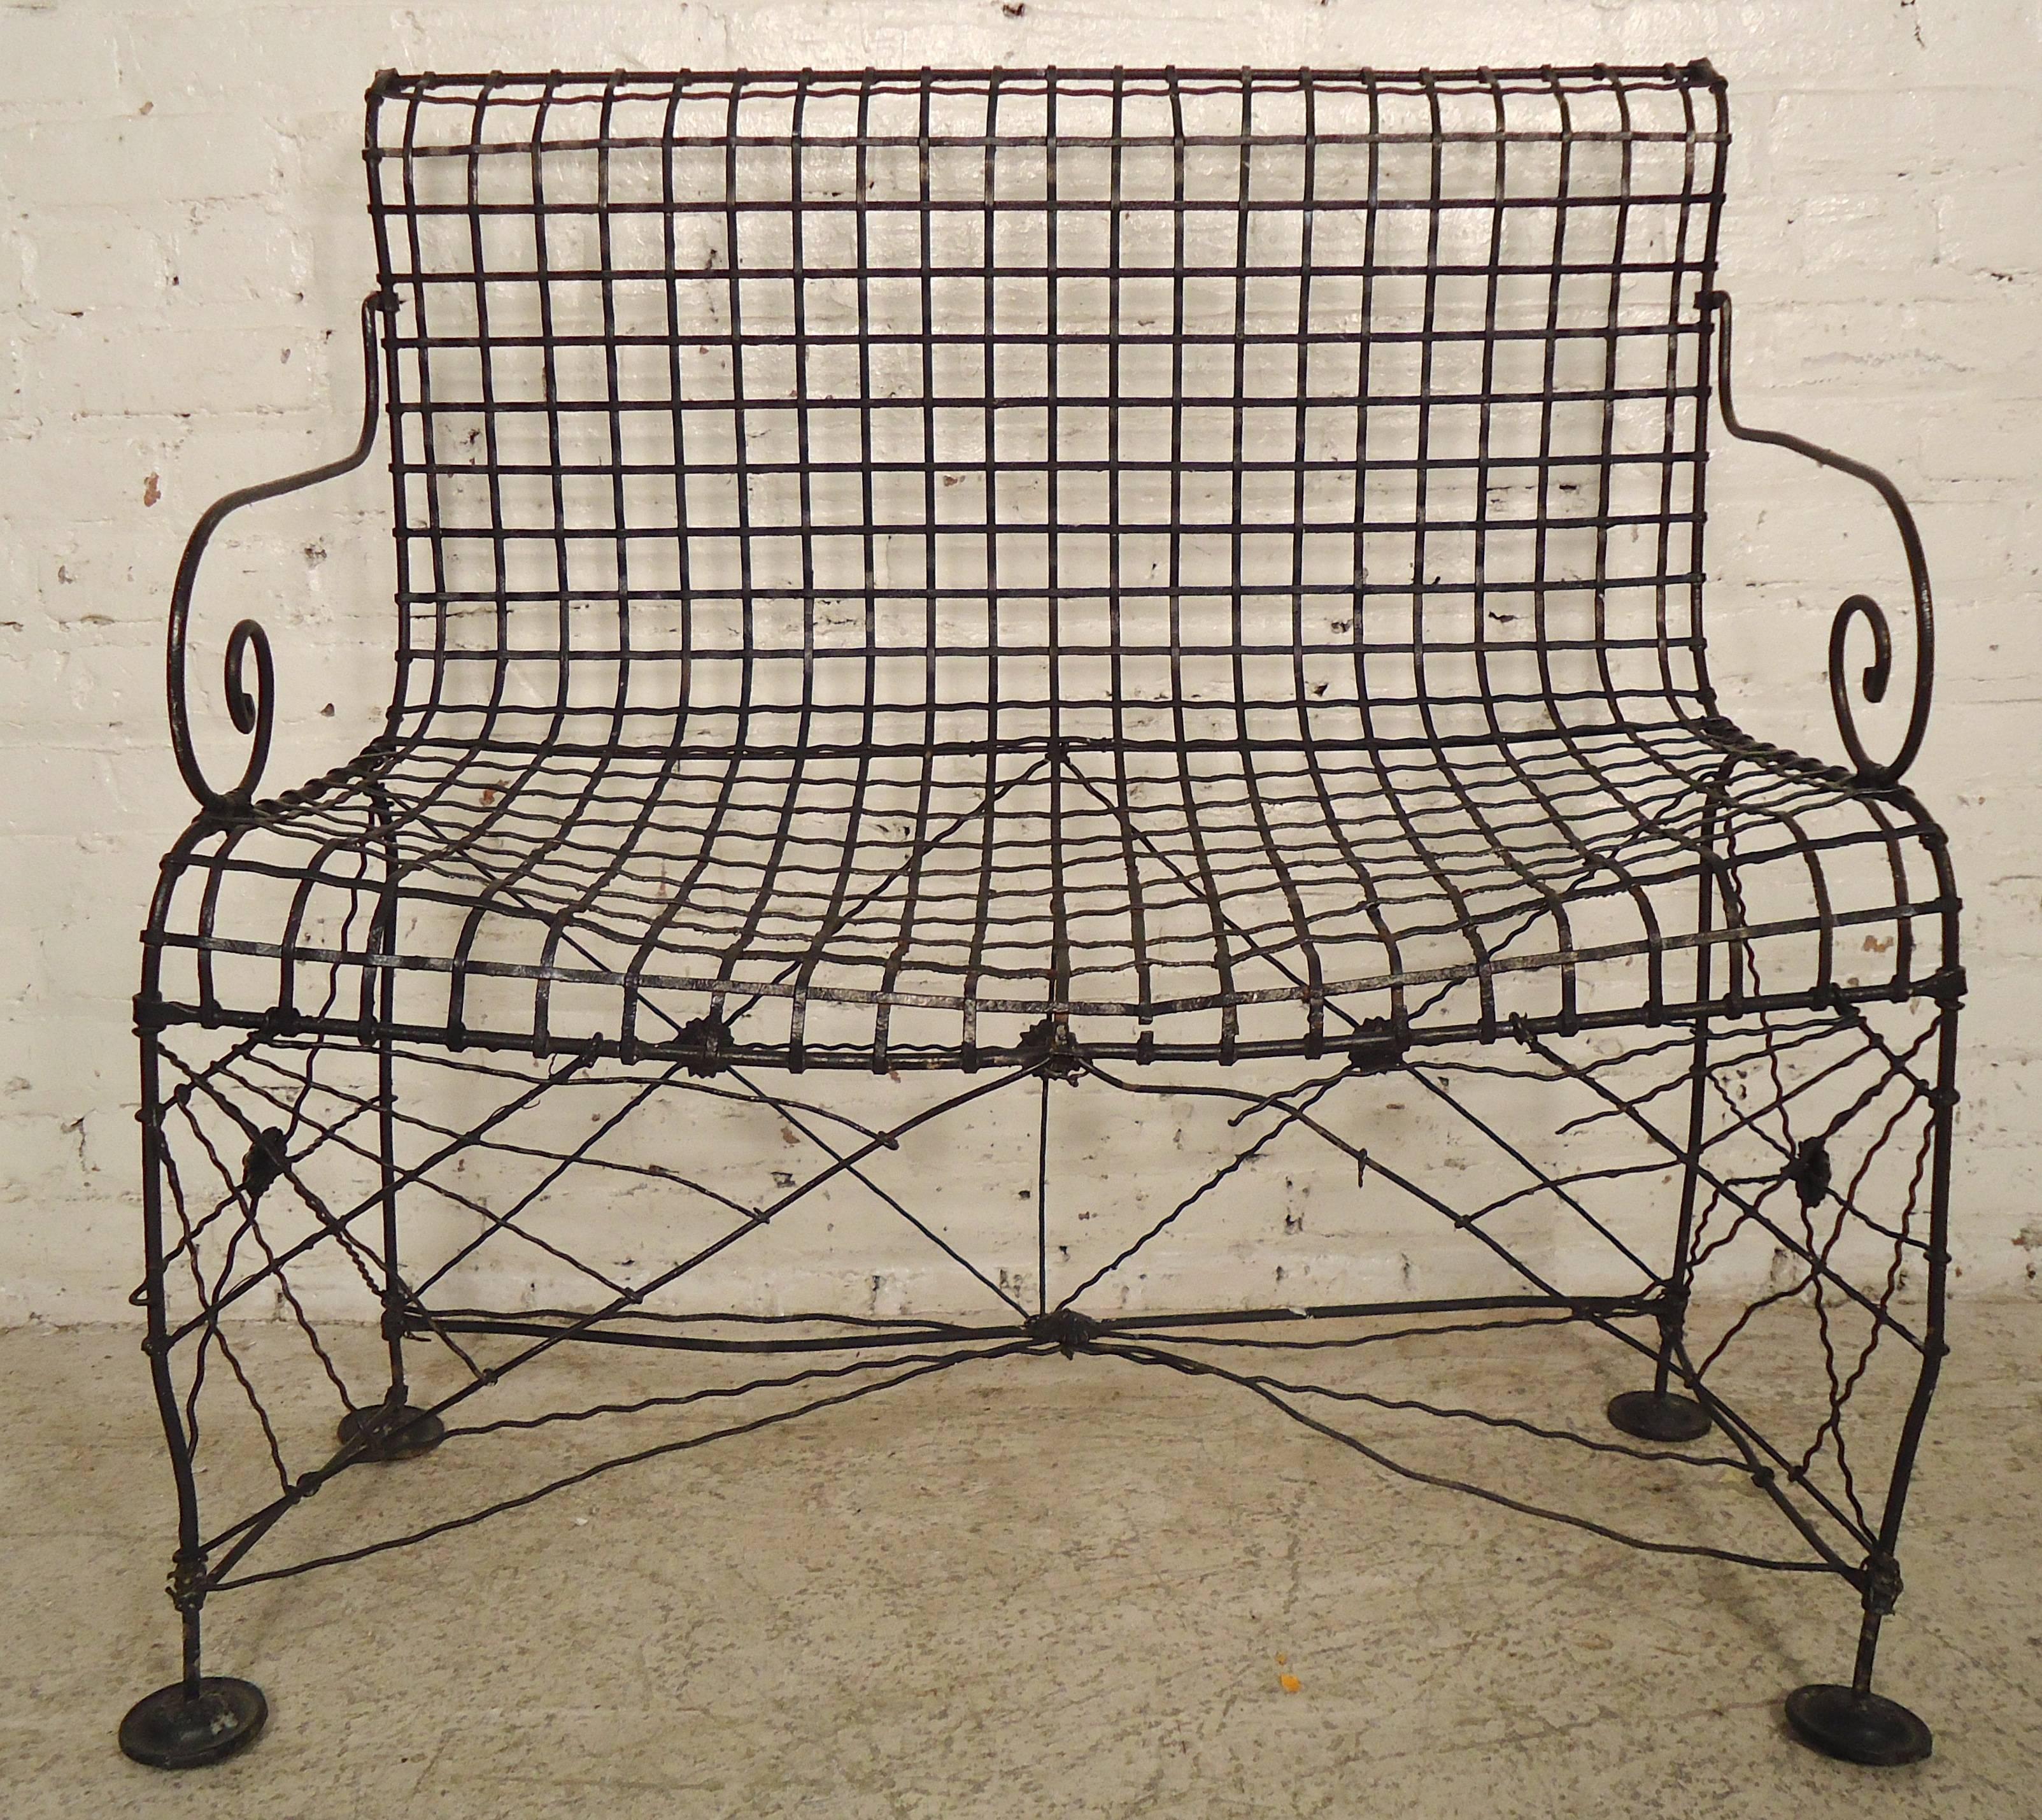 Attractive petite iron bench with scrolled arms and webbed base. Great as lawn furniture.
Measures: Seat height 17